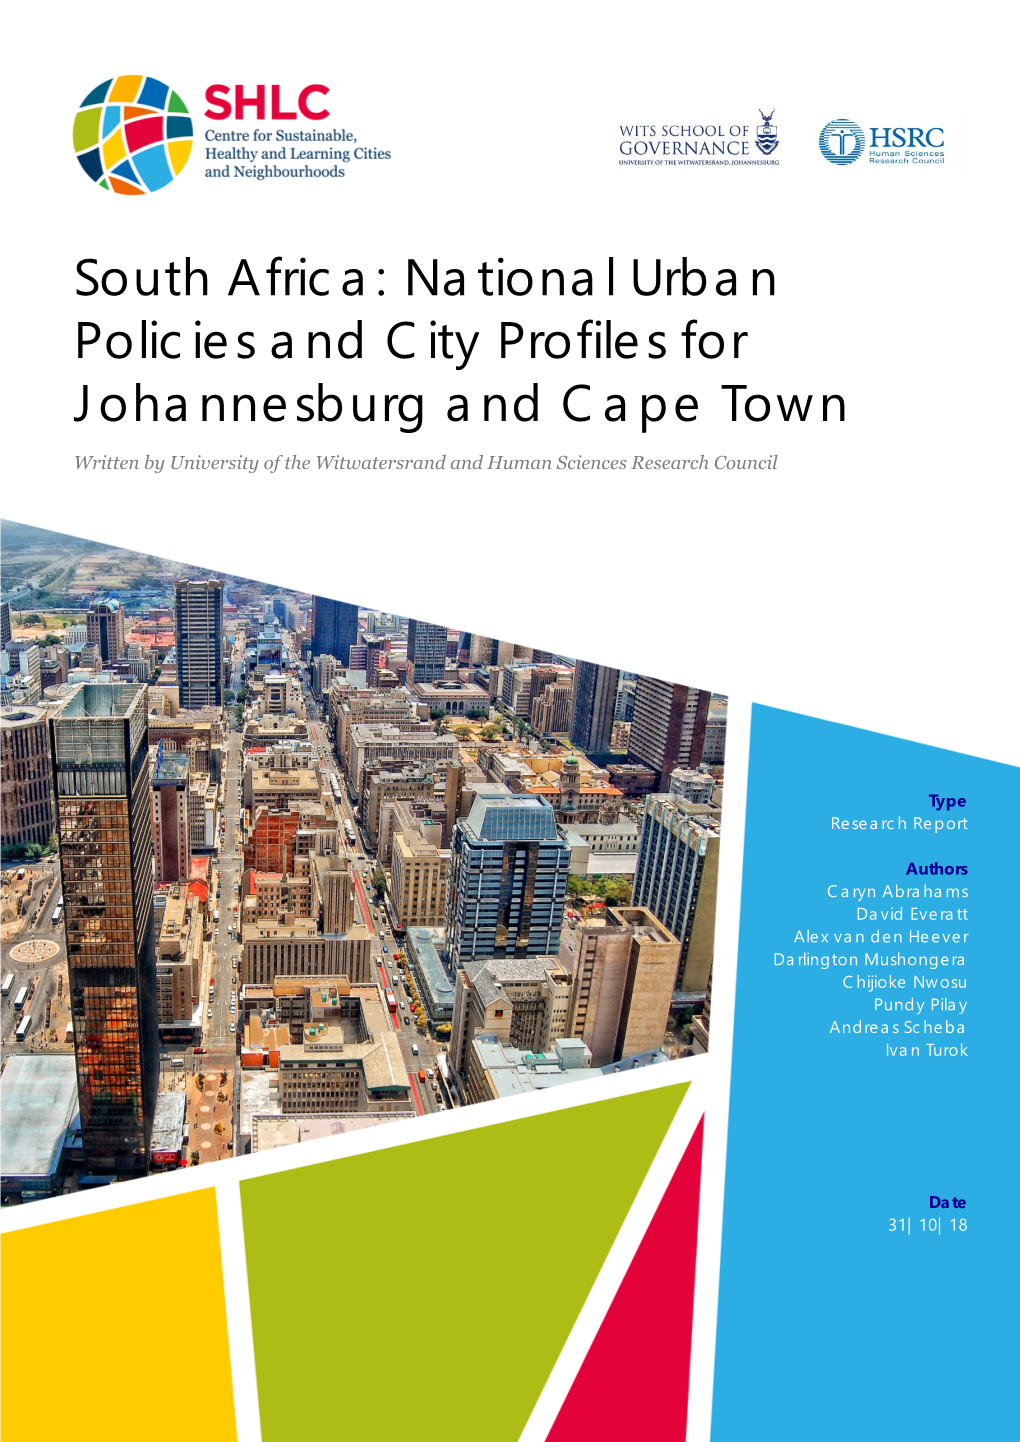 South Africa: National Urban Policies and City Profiles for Johannesburg and Cape Town